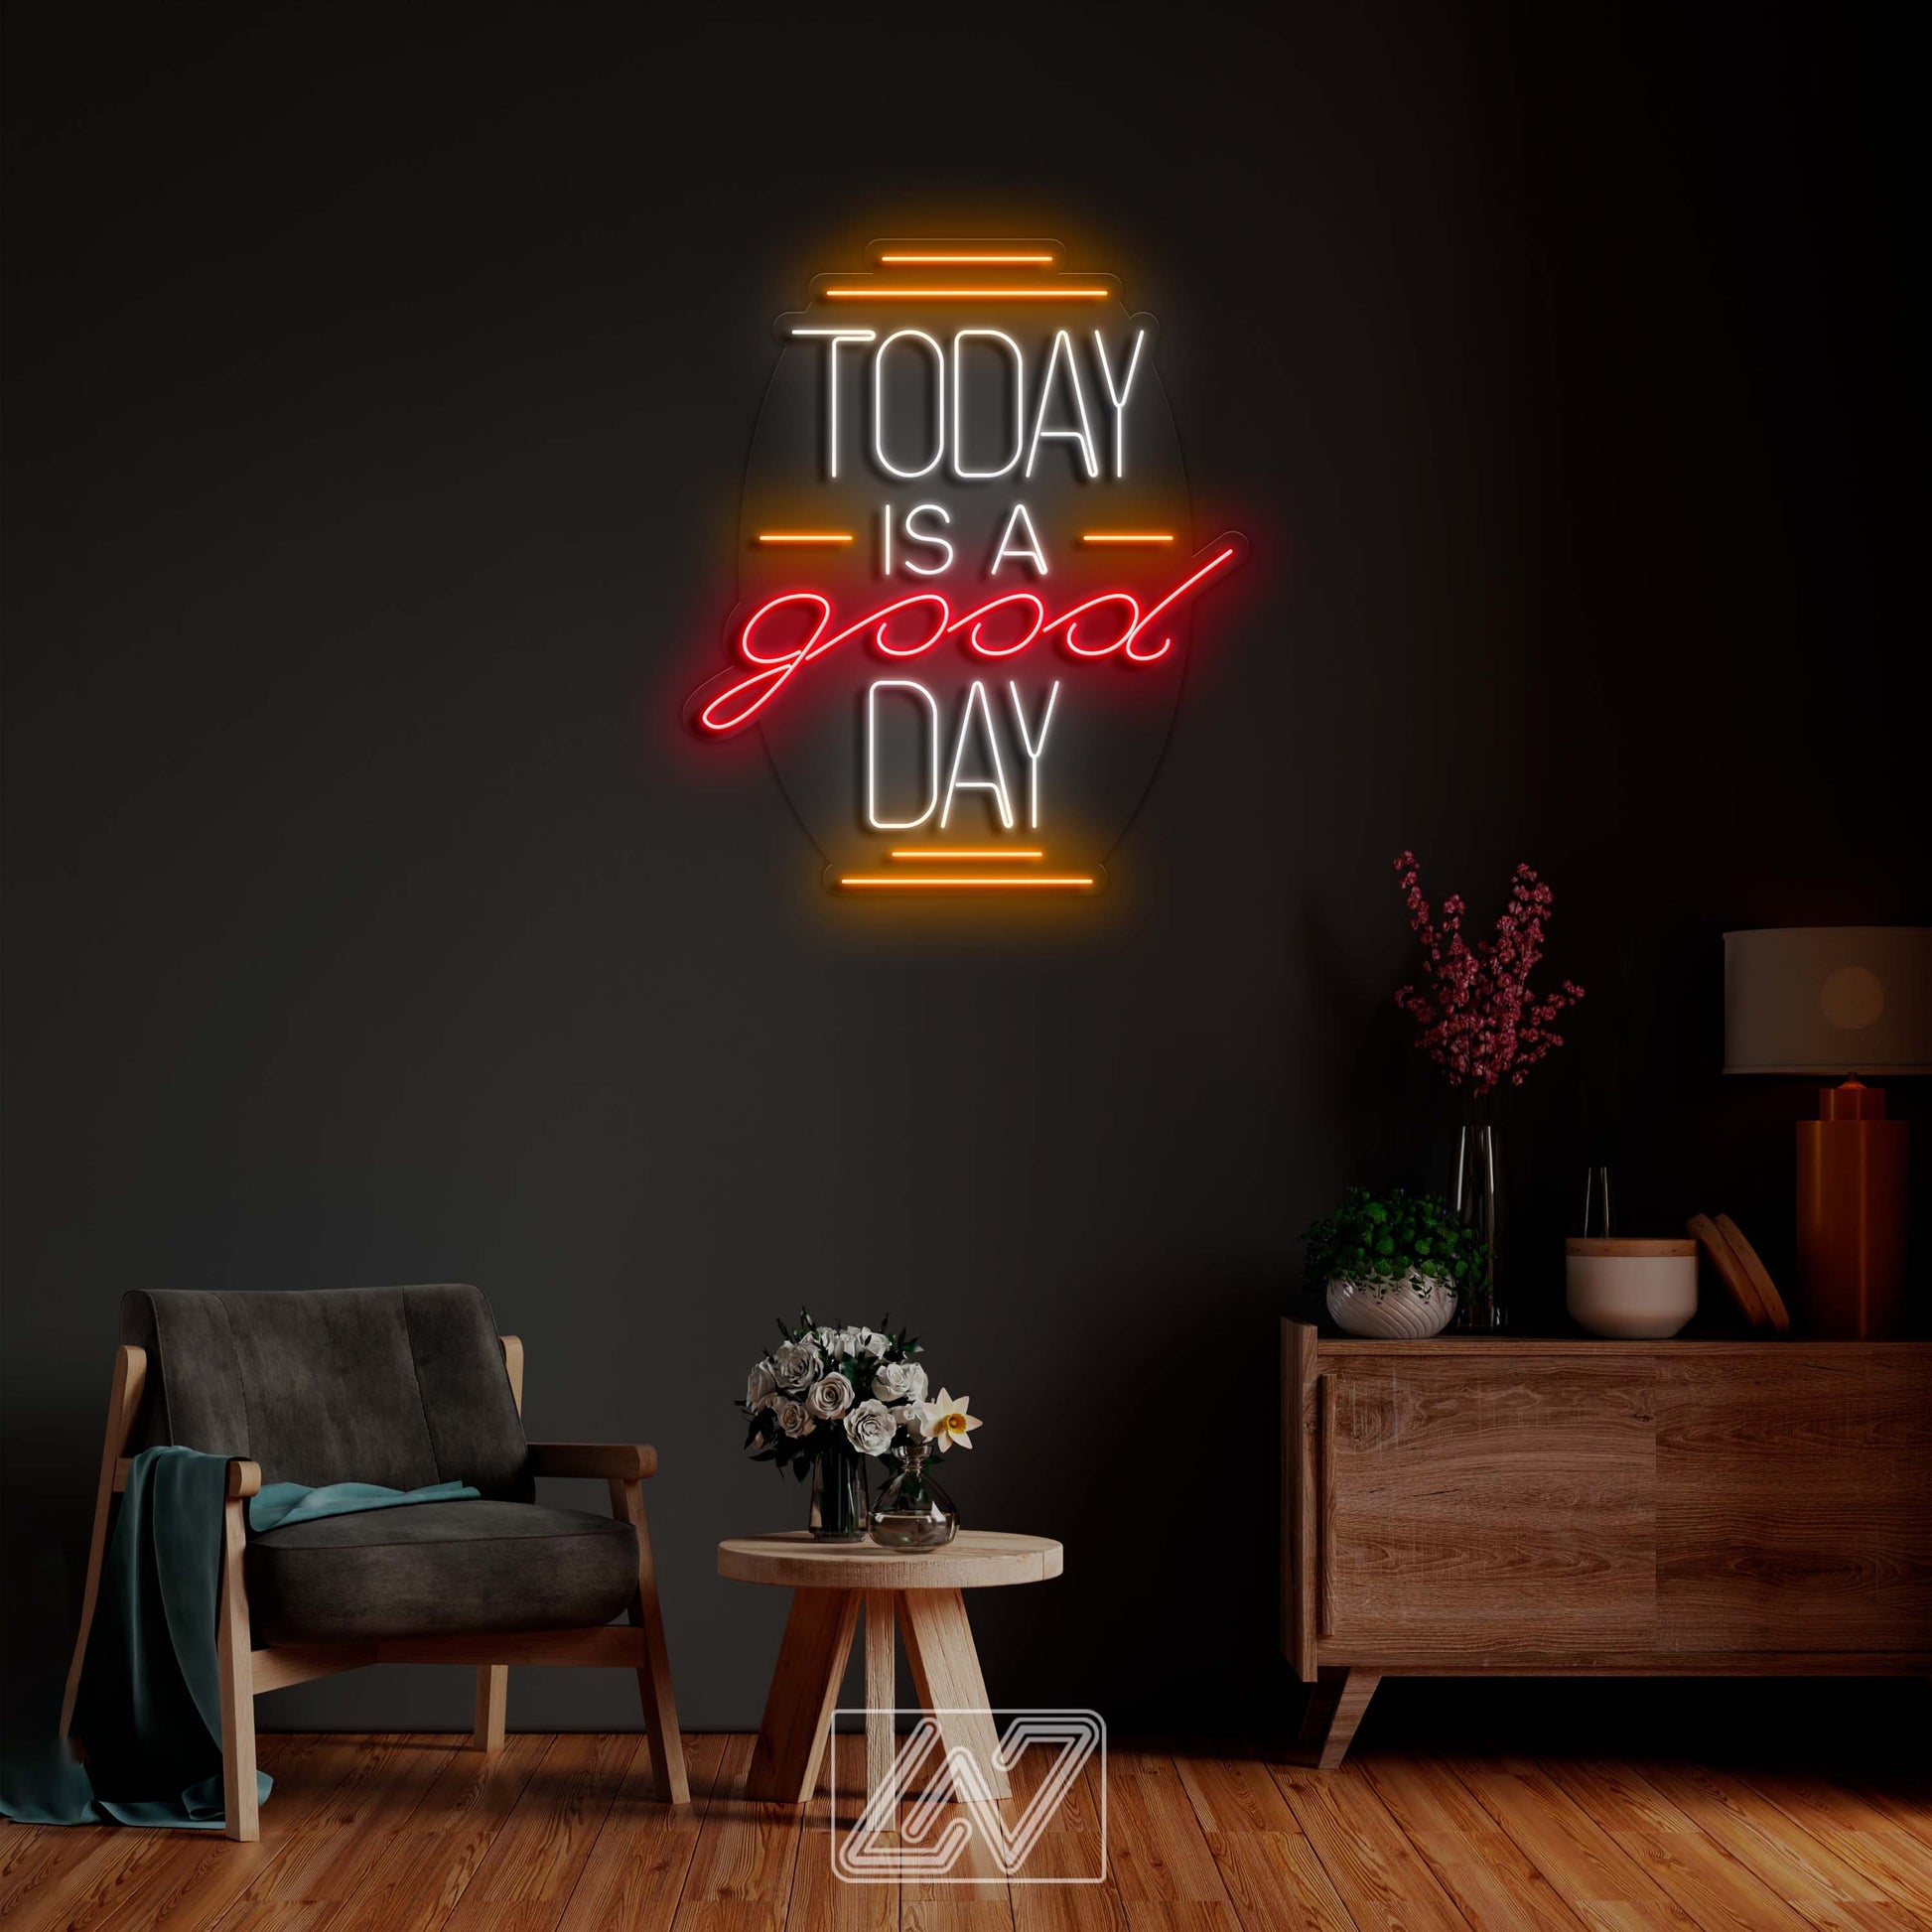 Today is a Good Day - LED Neon Sign, Neon Wall Decor, Custom Neon Sign, Personalised Neon Sign, Custom Neon Light, Vibe Neon Sign